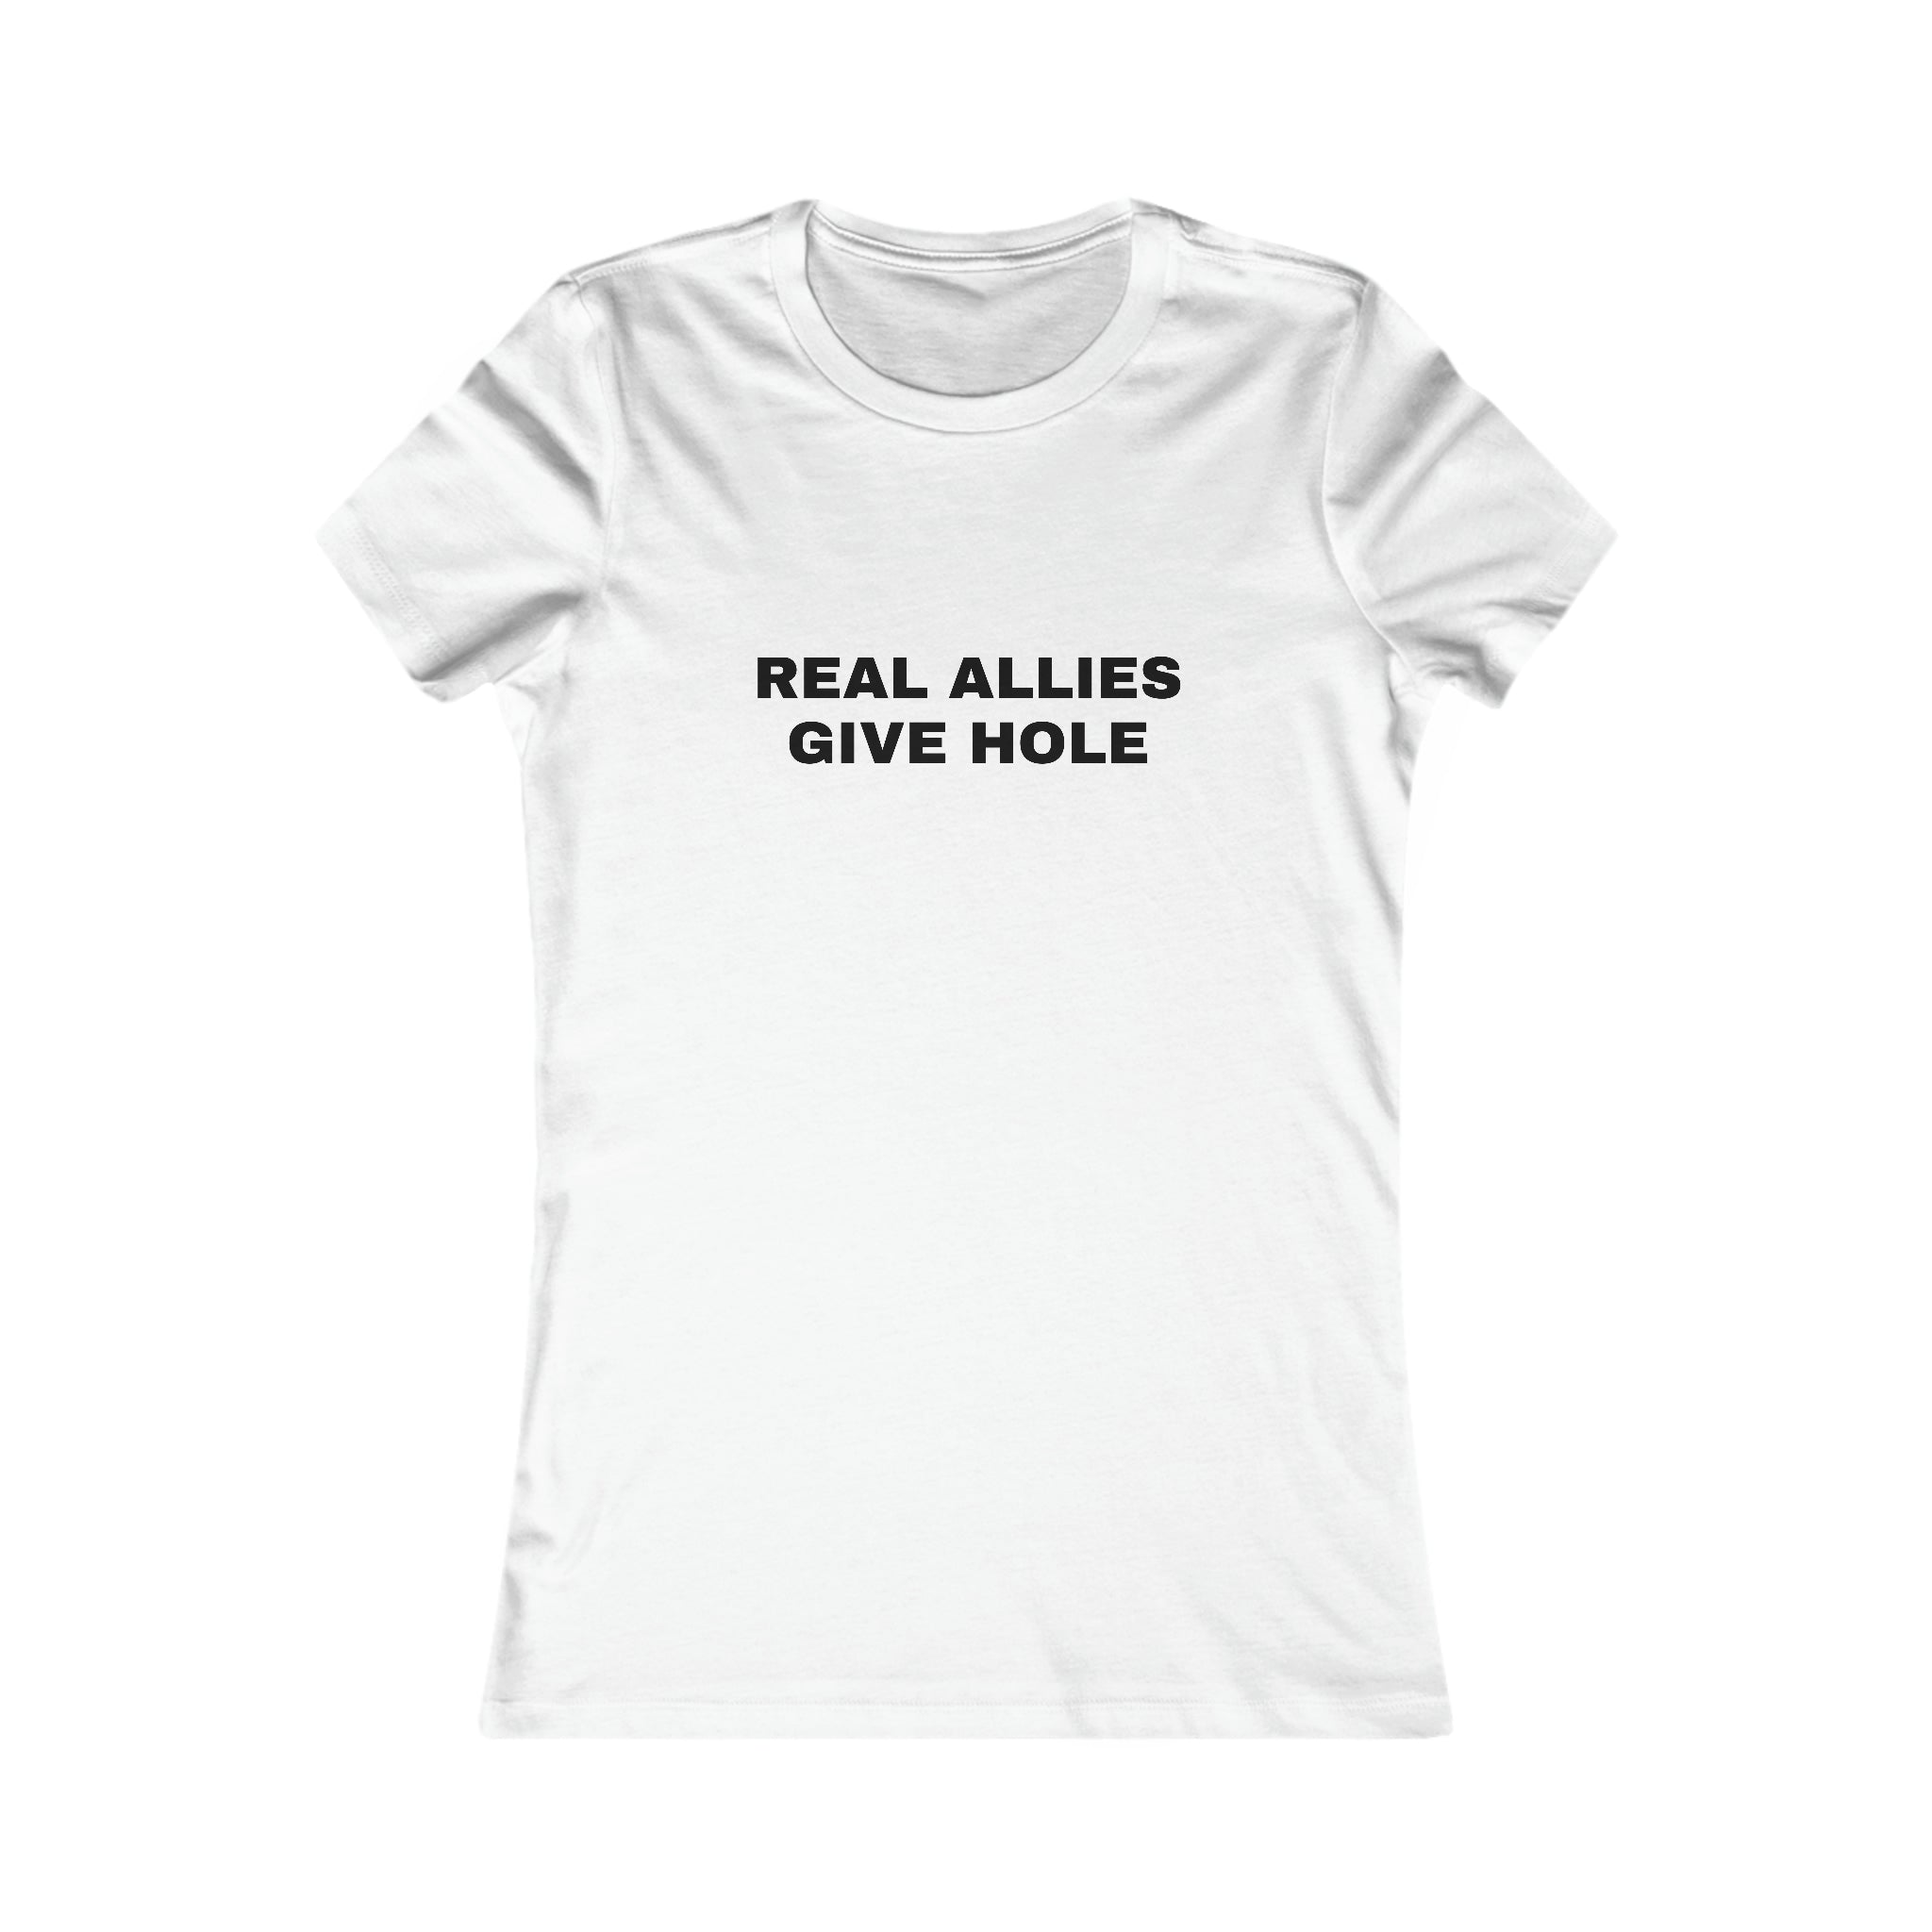 Shirt for Real Allies - Femme Fit